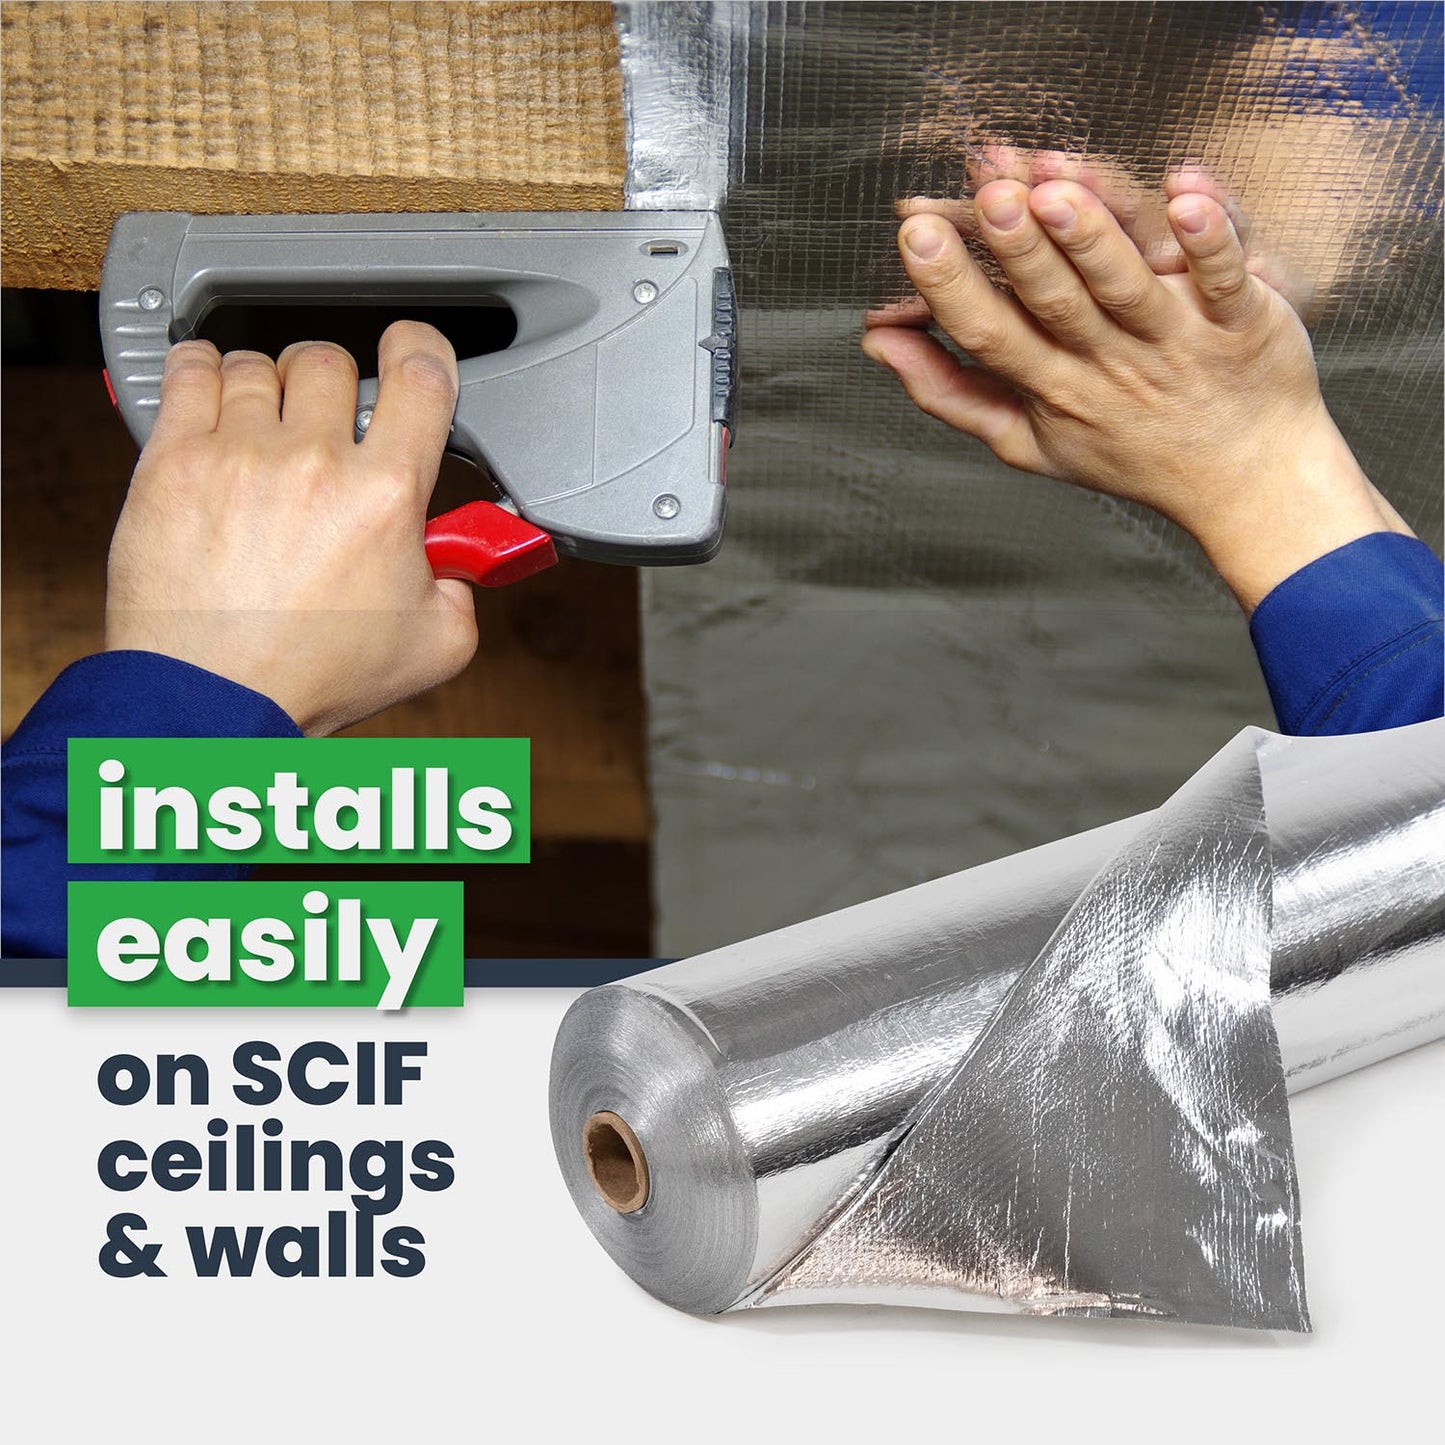 SCIF material installs easily on SCIF ceilings and walls